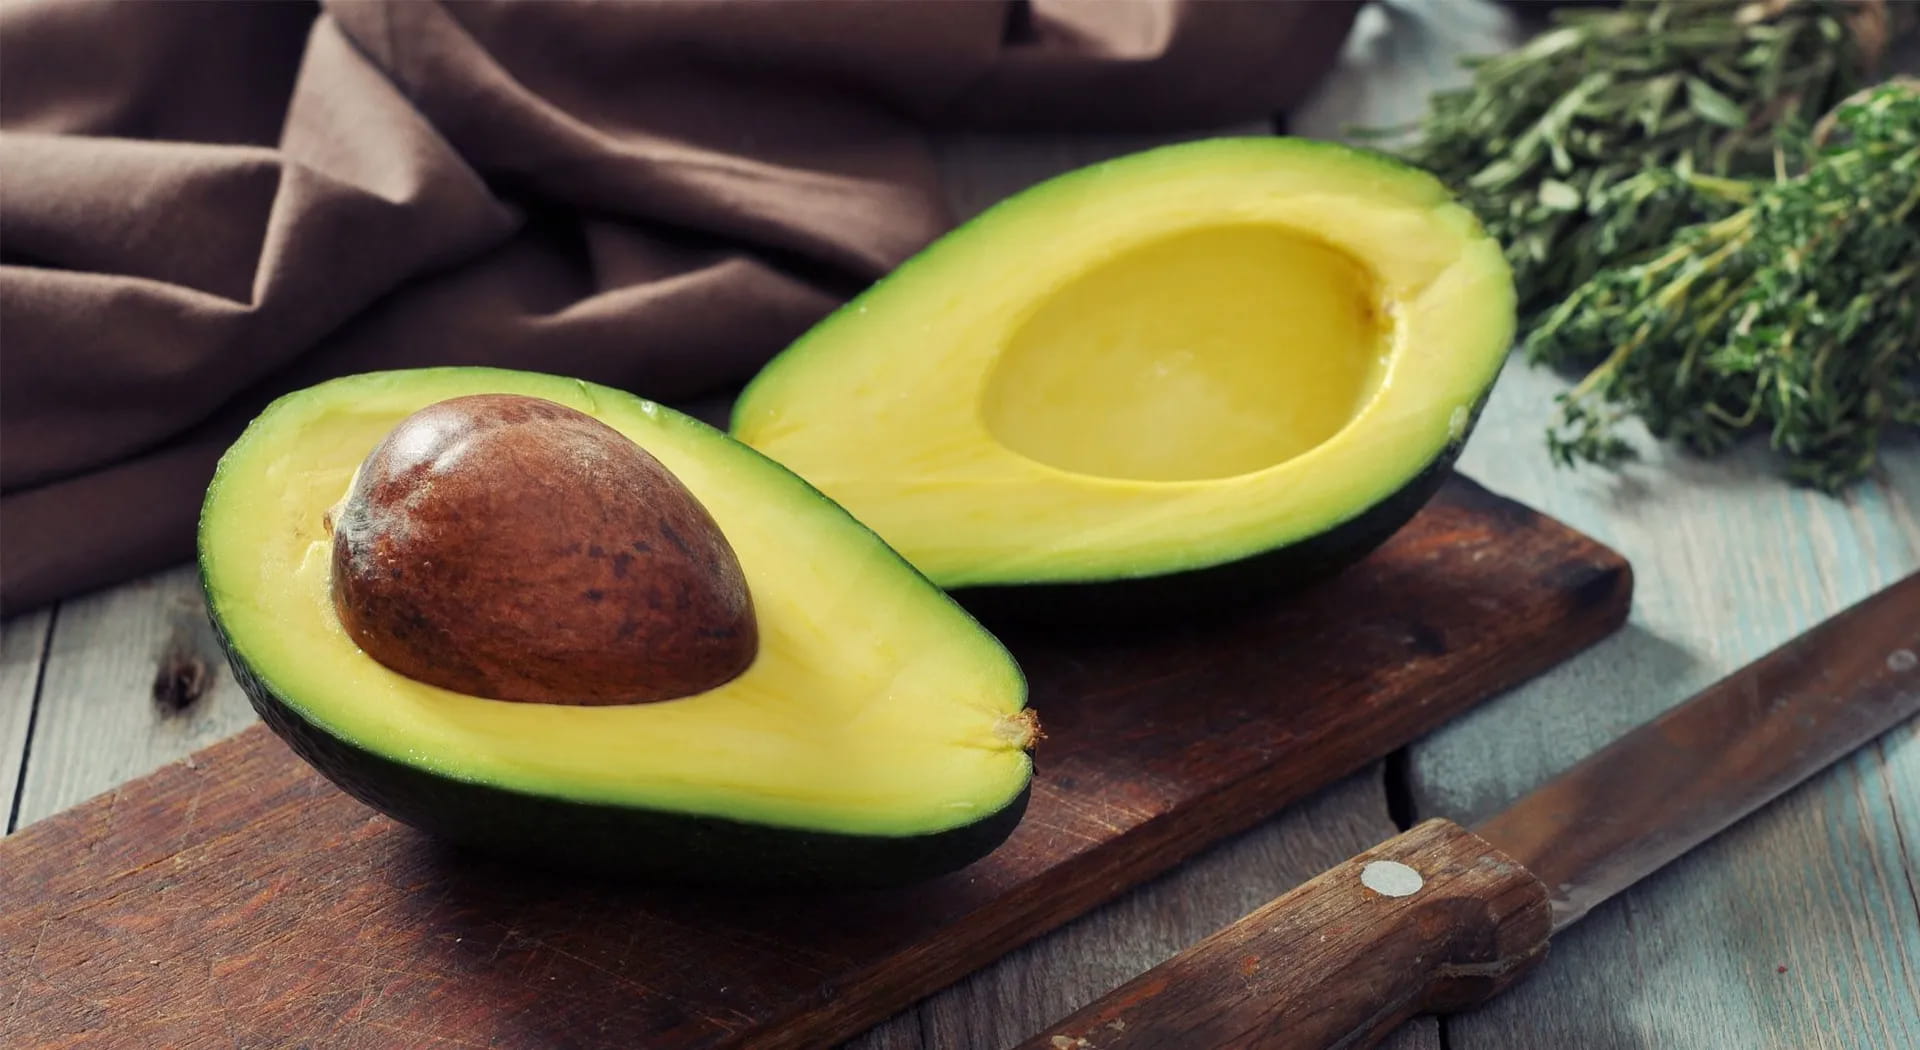 How to clean the avocado